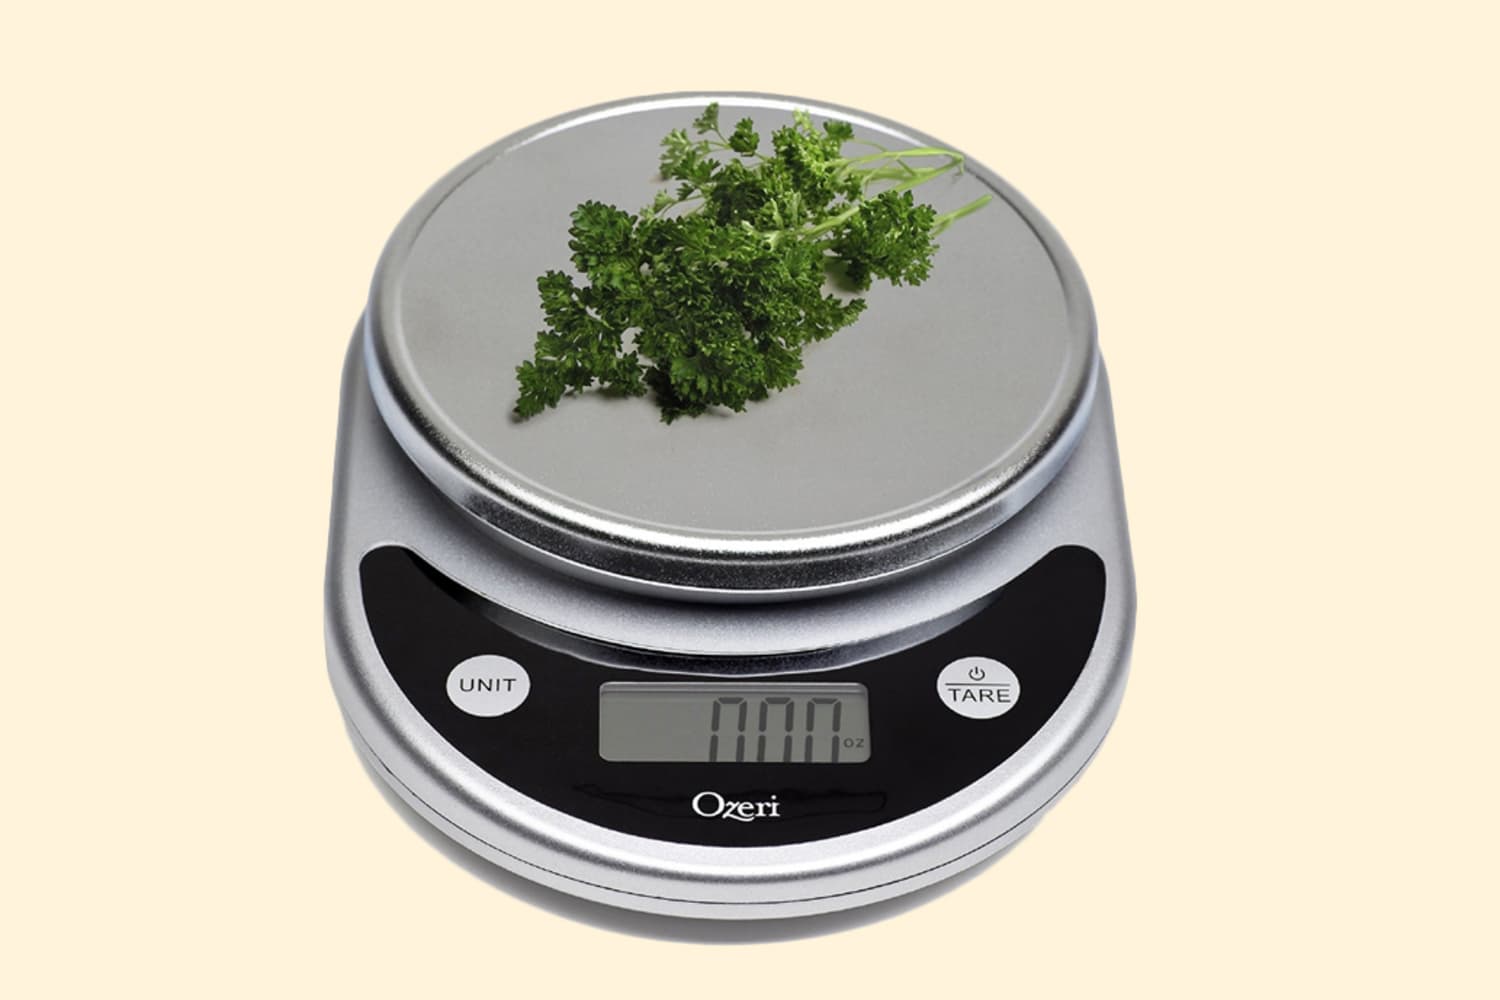 6 Reasons Why You Need a Digital Kitchen Scale